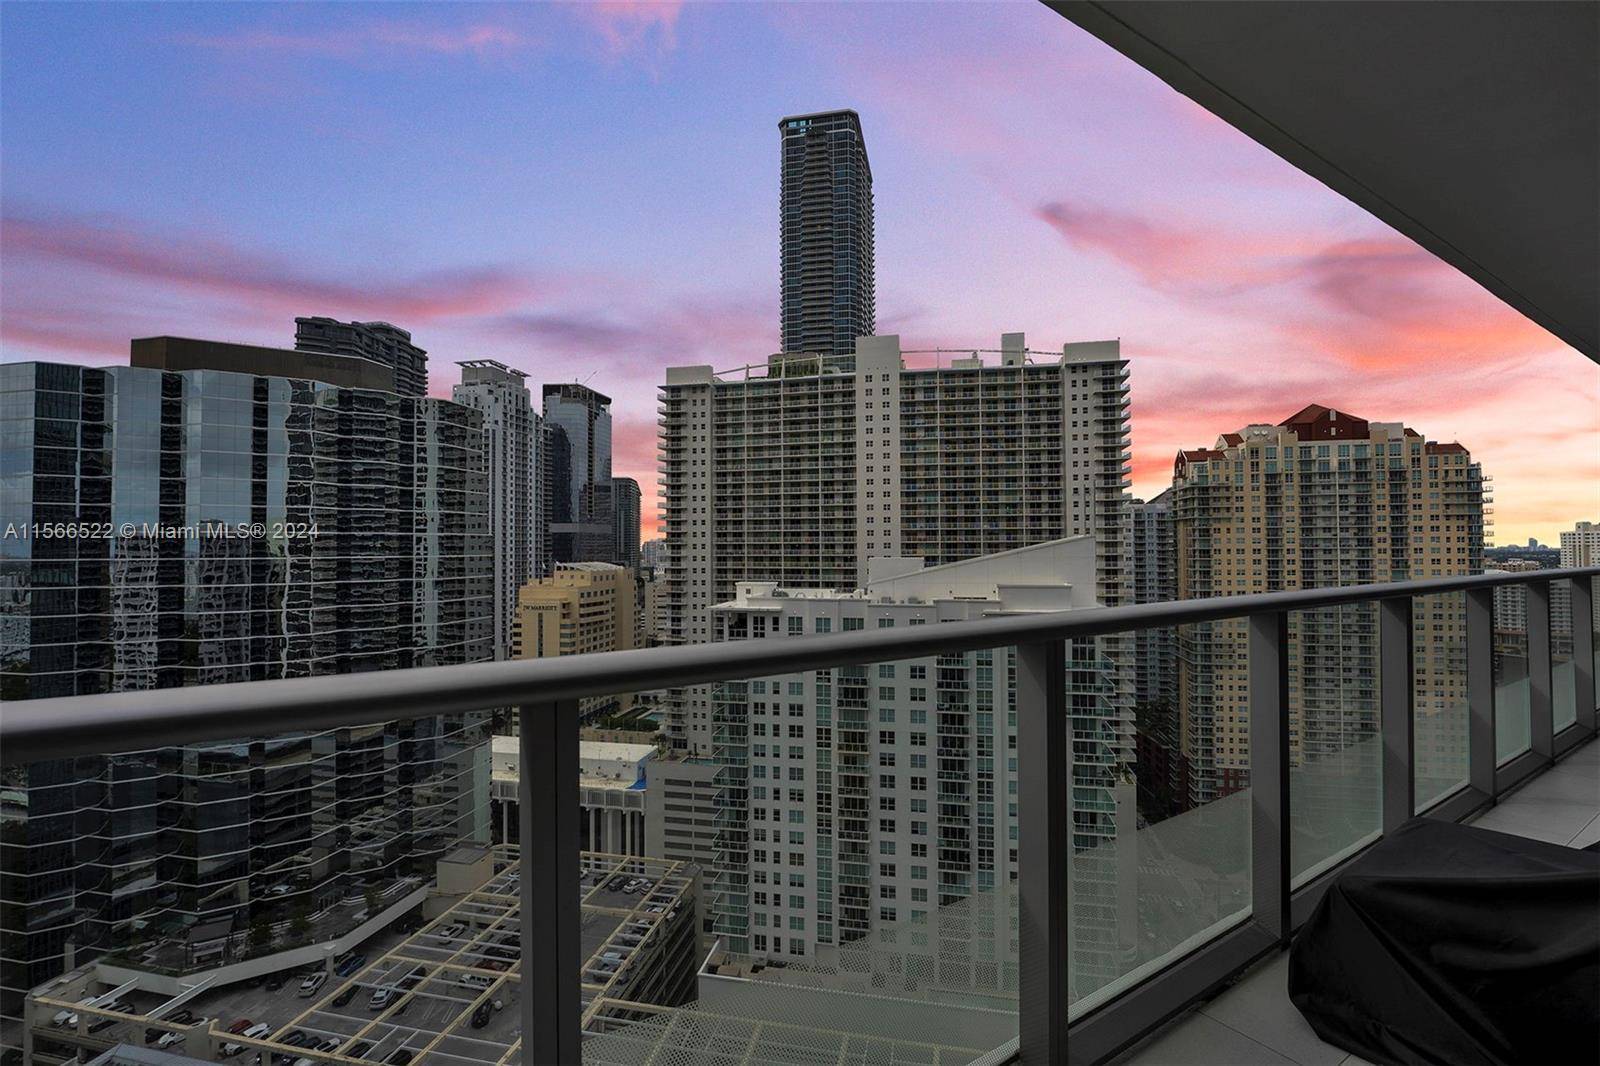 BEAUTIFUL ONE BEDROOM 1. 5 BATH UNIT FOR RENT IN BRICKELL HOUSE ON THE 27TH FLOOR WITH CITY AND PARTIAL WATER VIEWS.